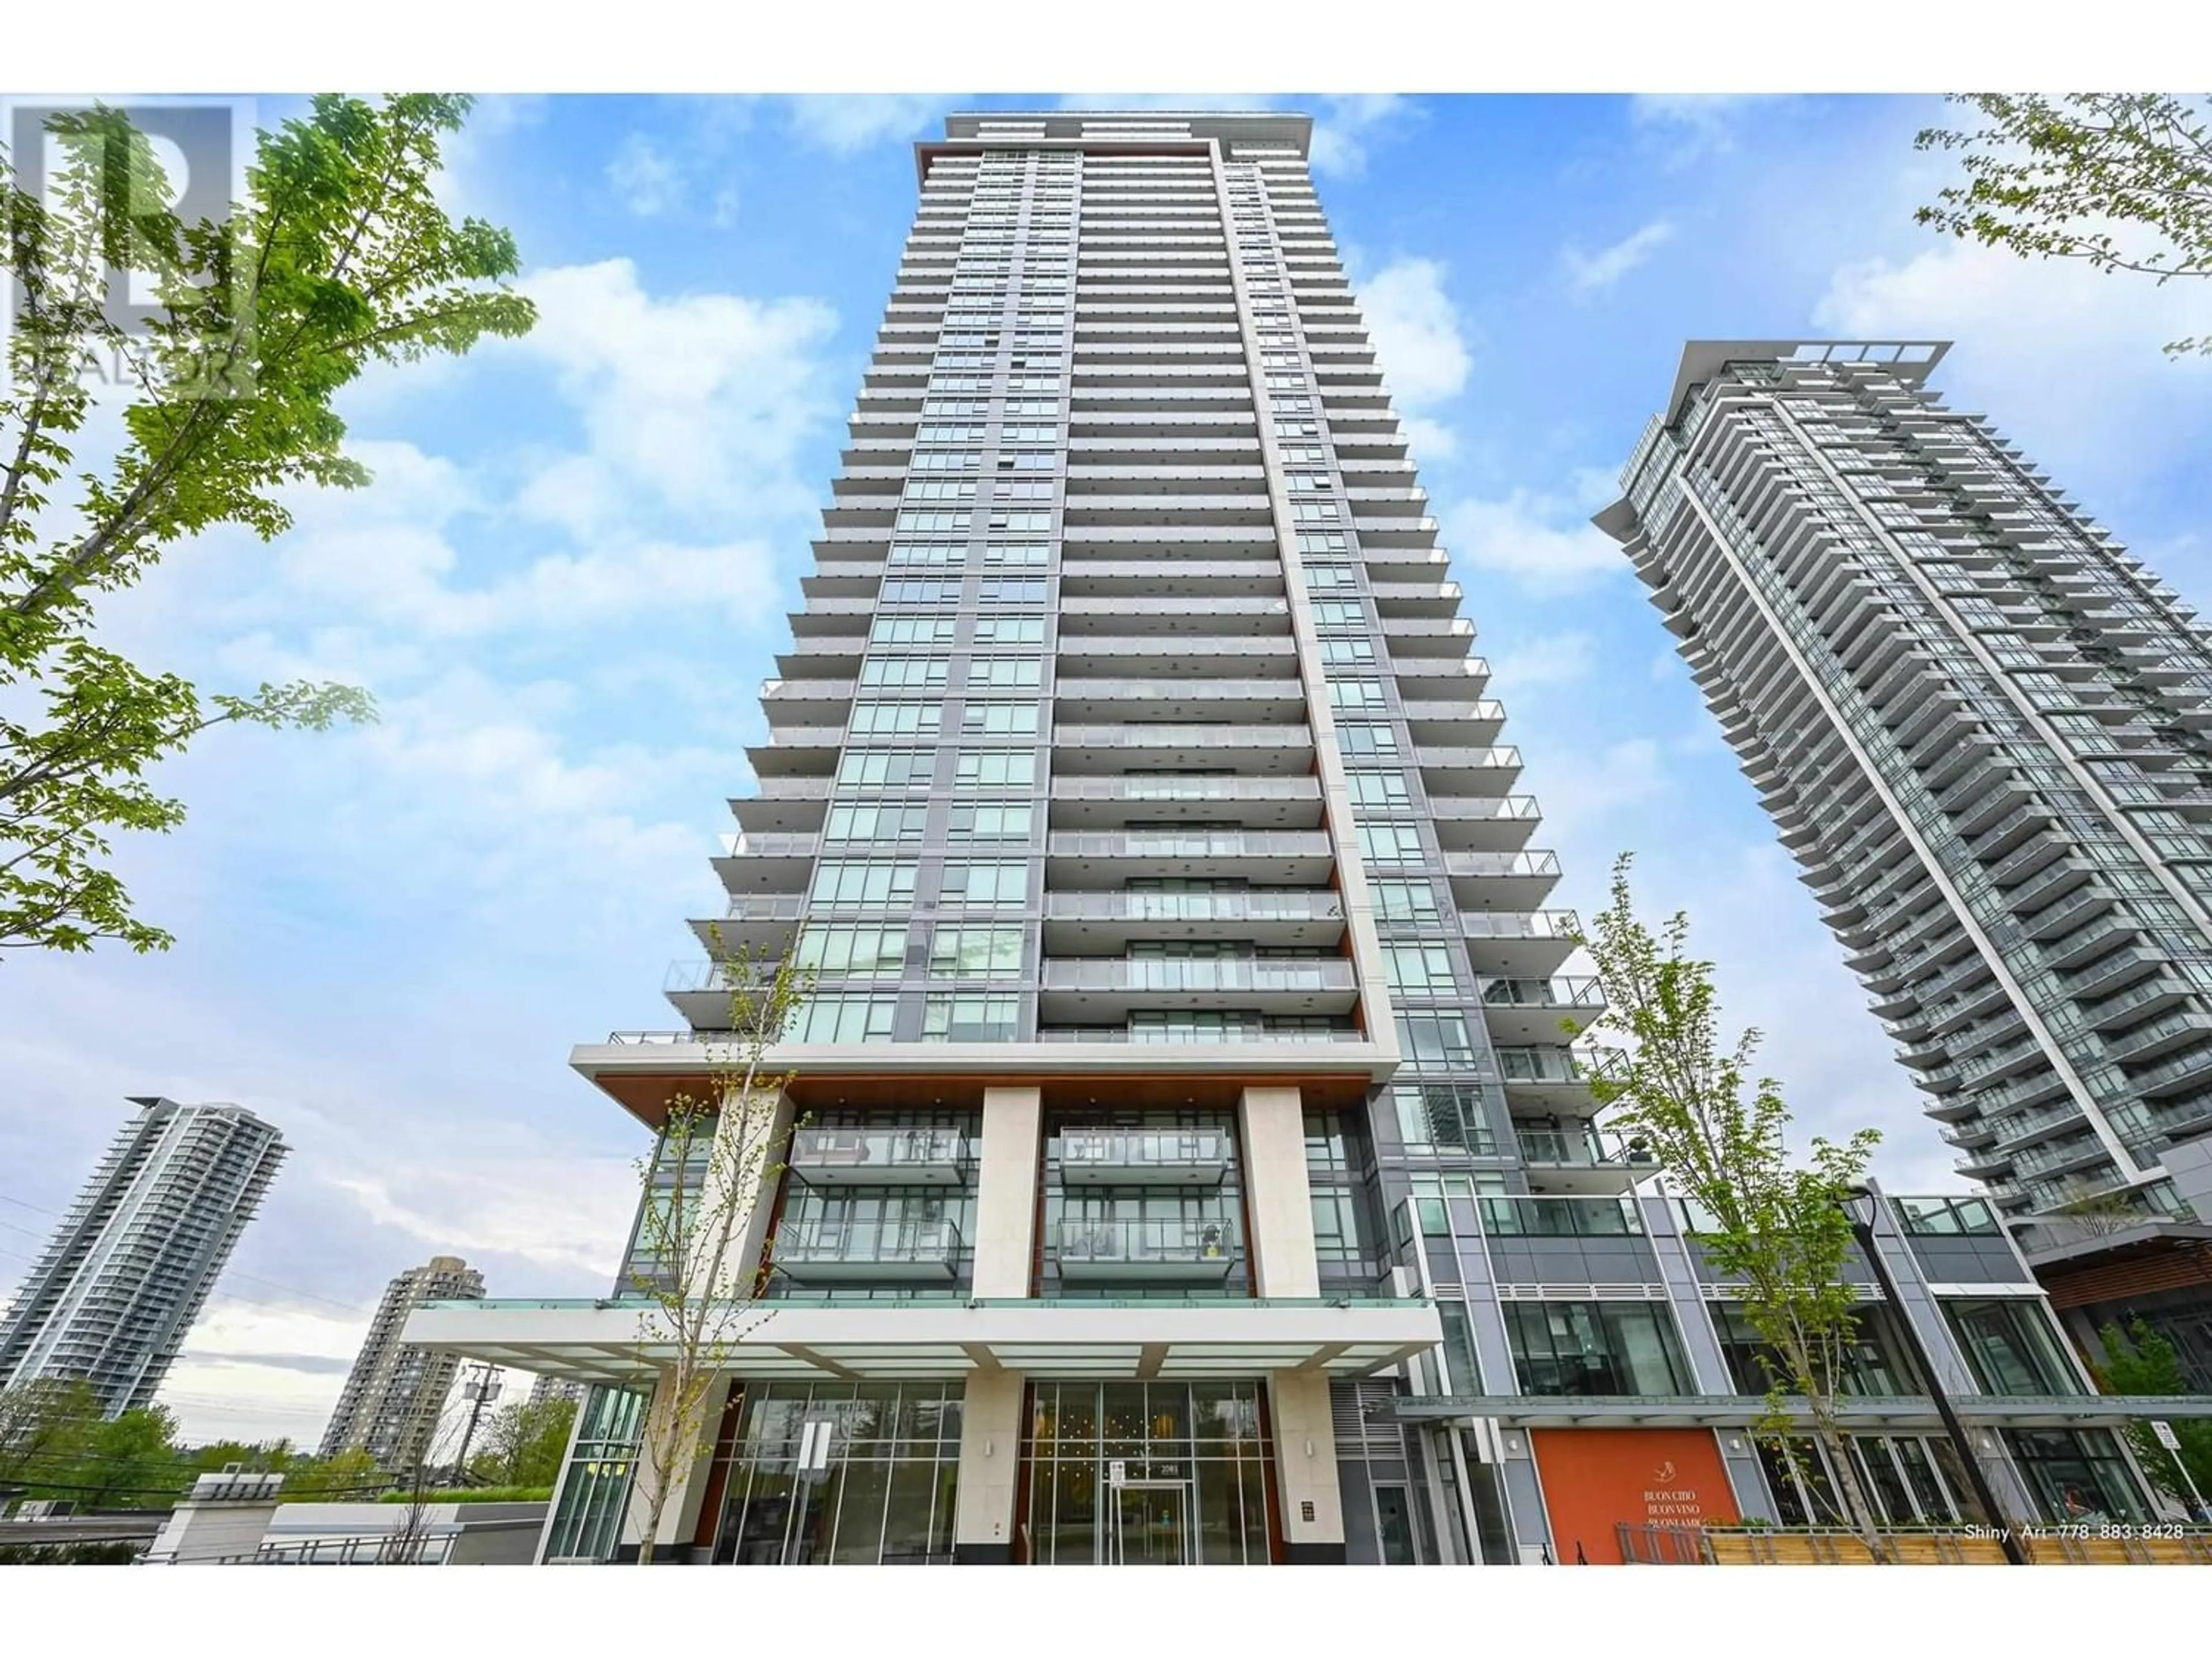 A pic from exterior of the house or condo for 3506 2085 SKYLINE COURT, Burnaby British Columbia V5C0M6